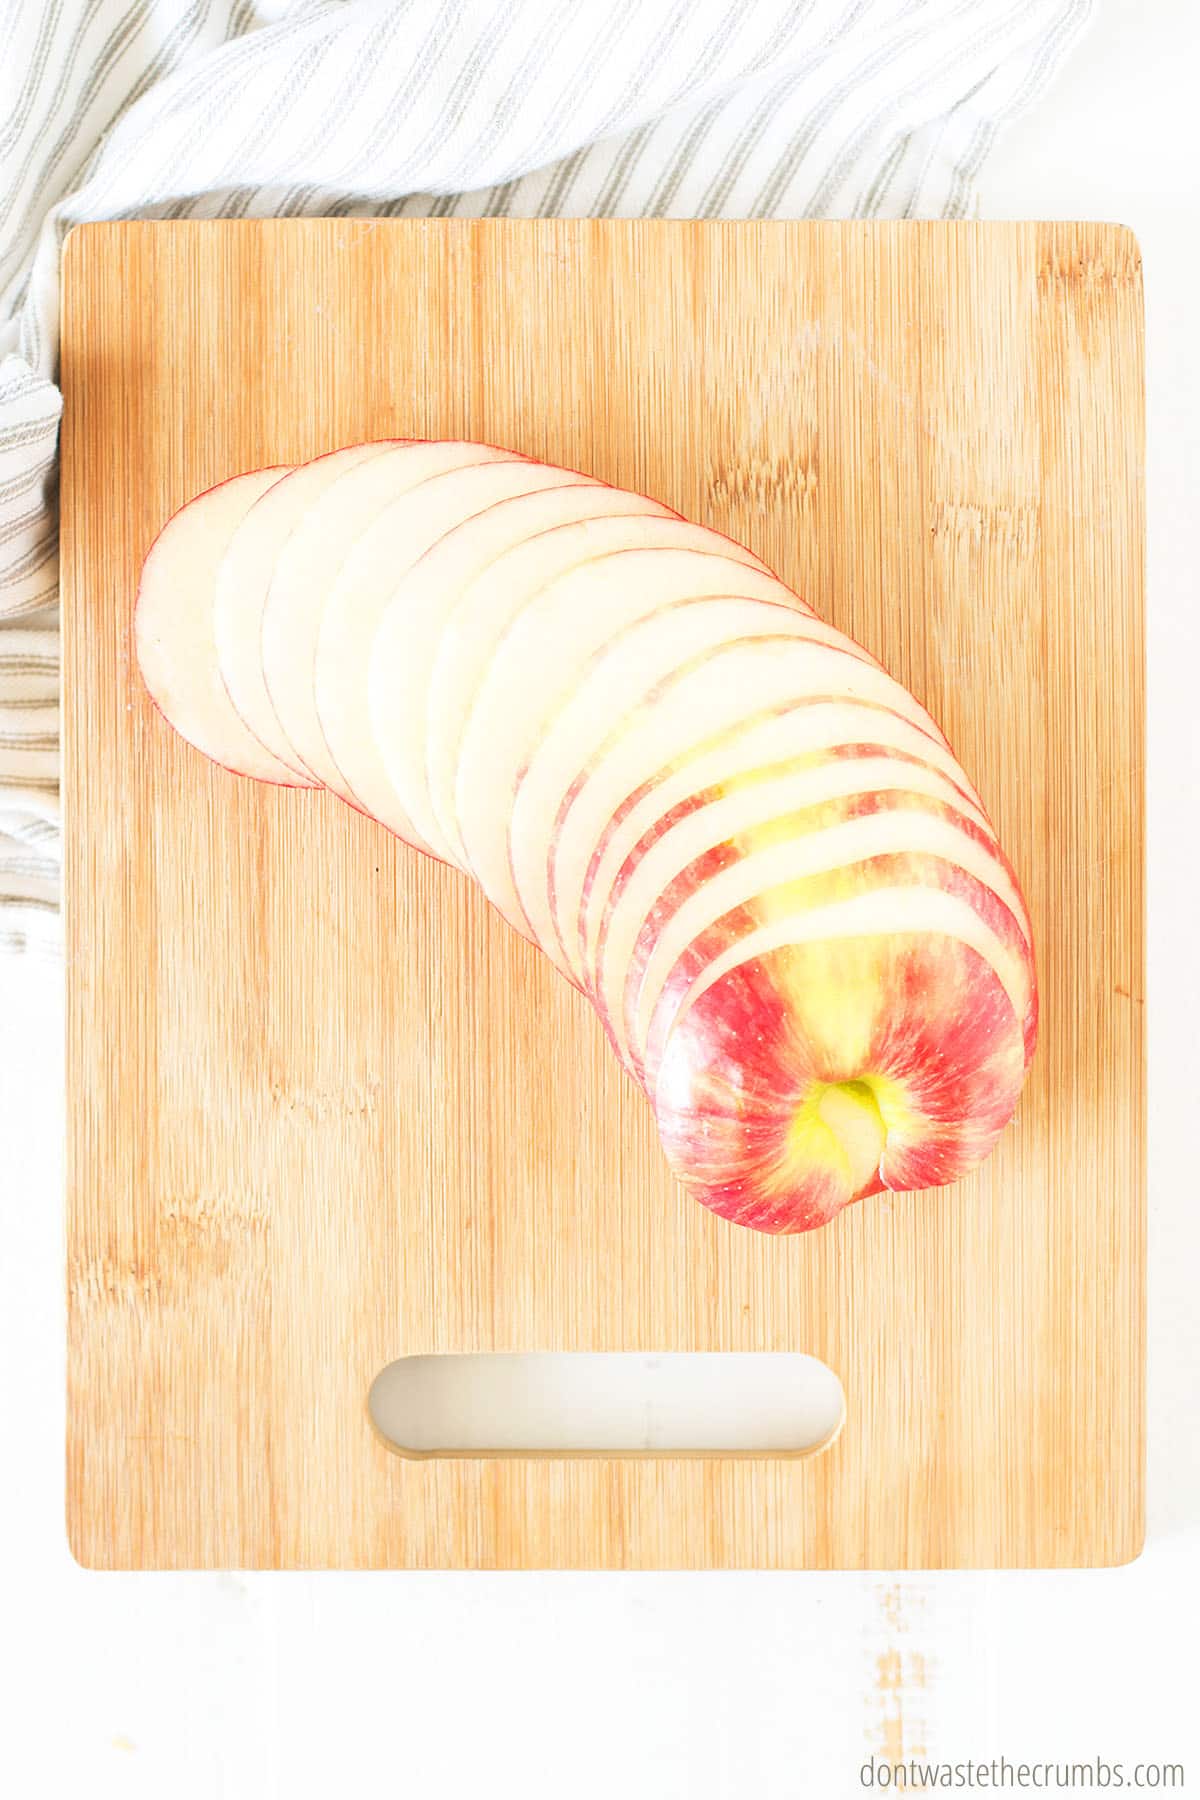 sliced apples on a cutting board